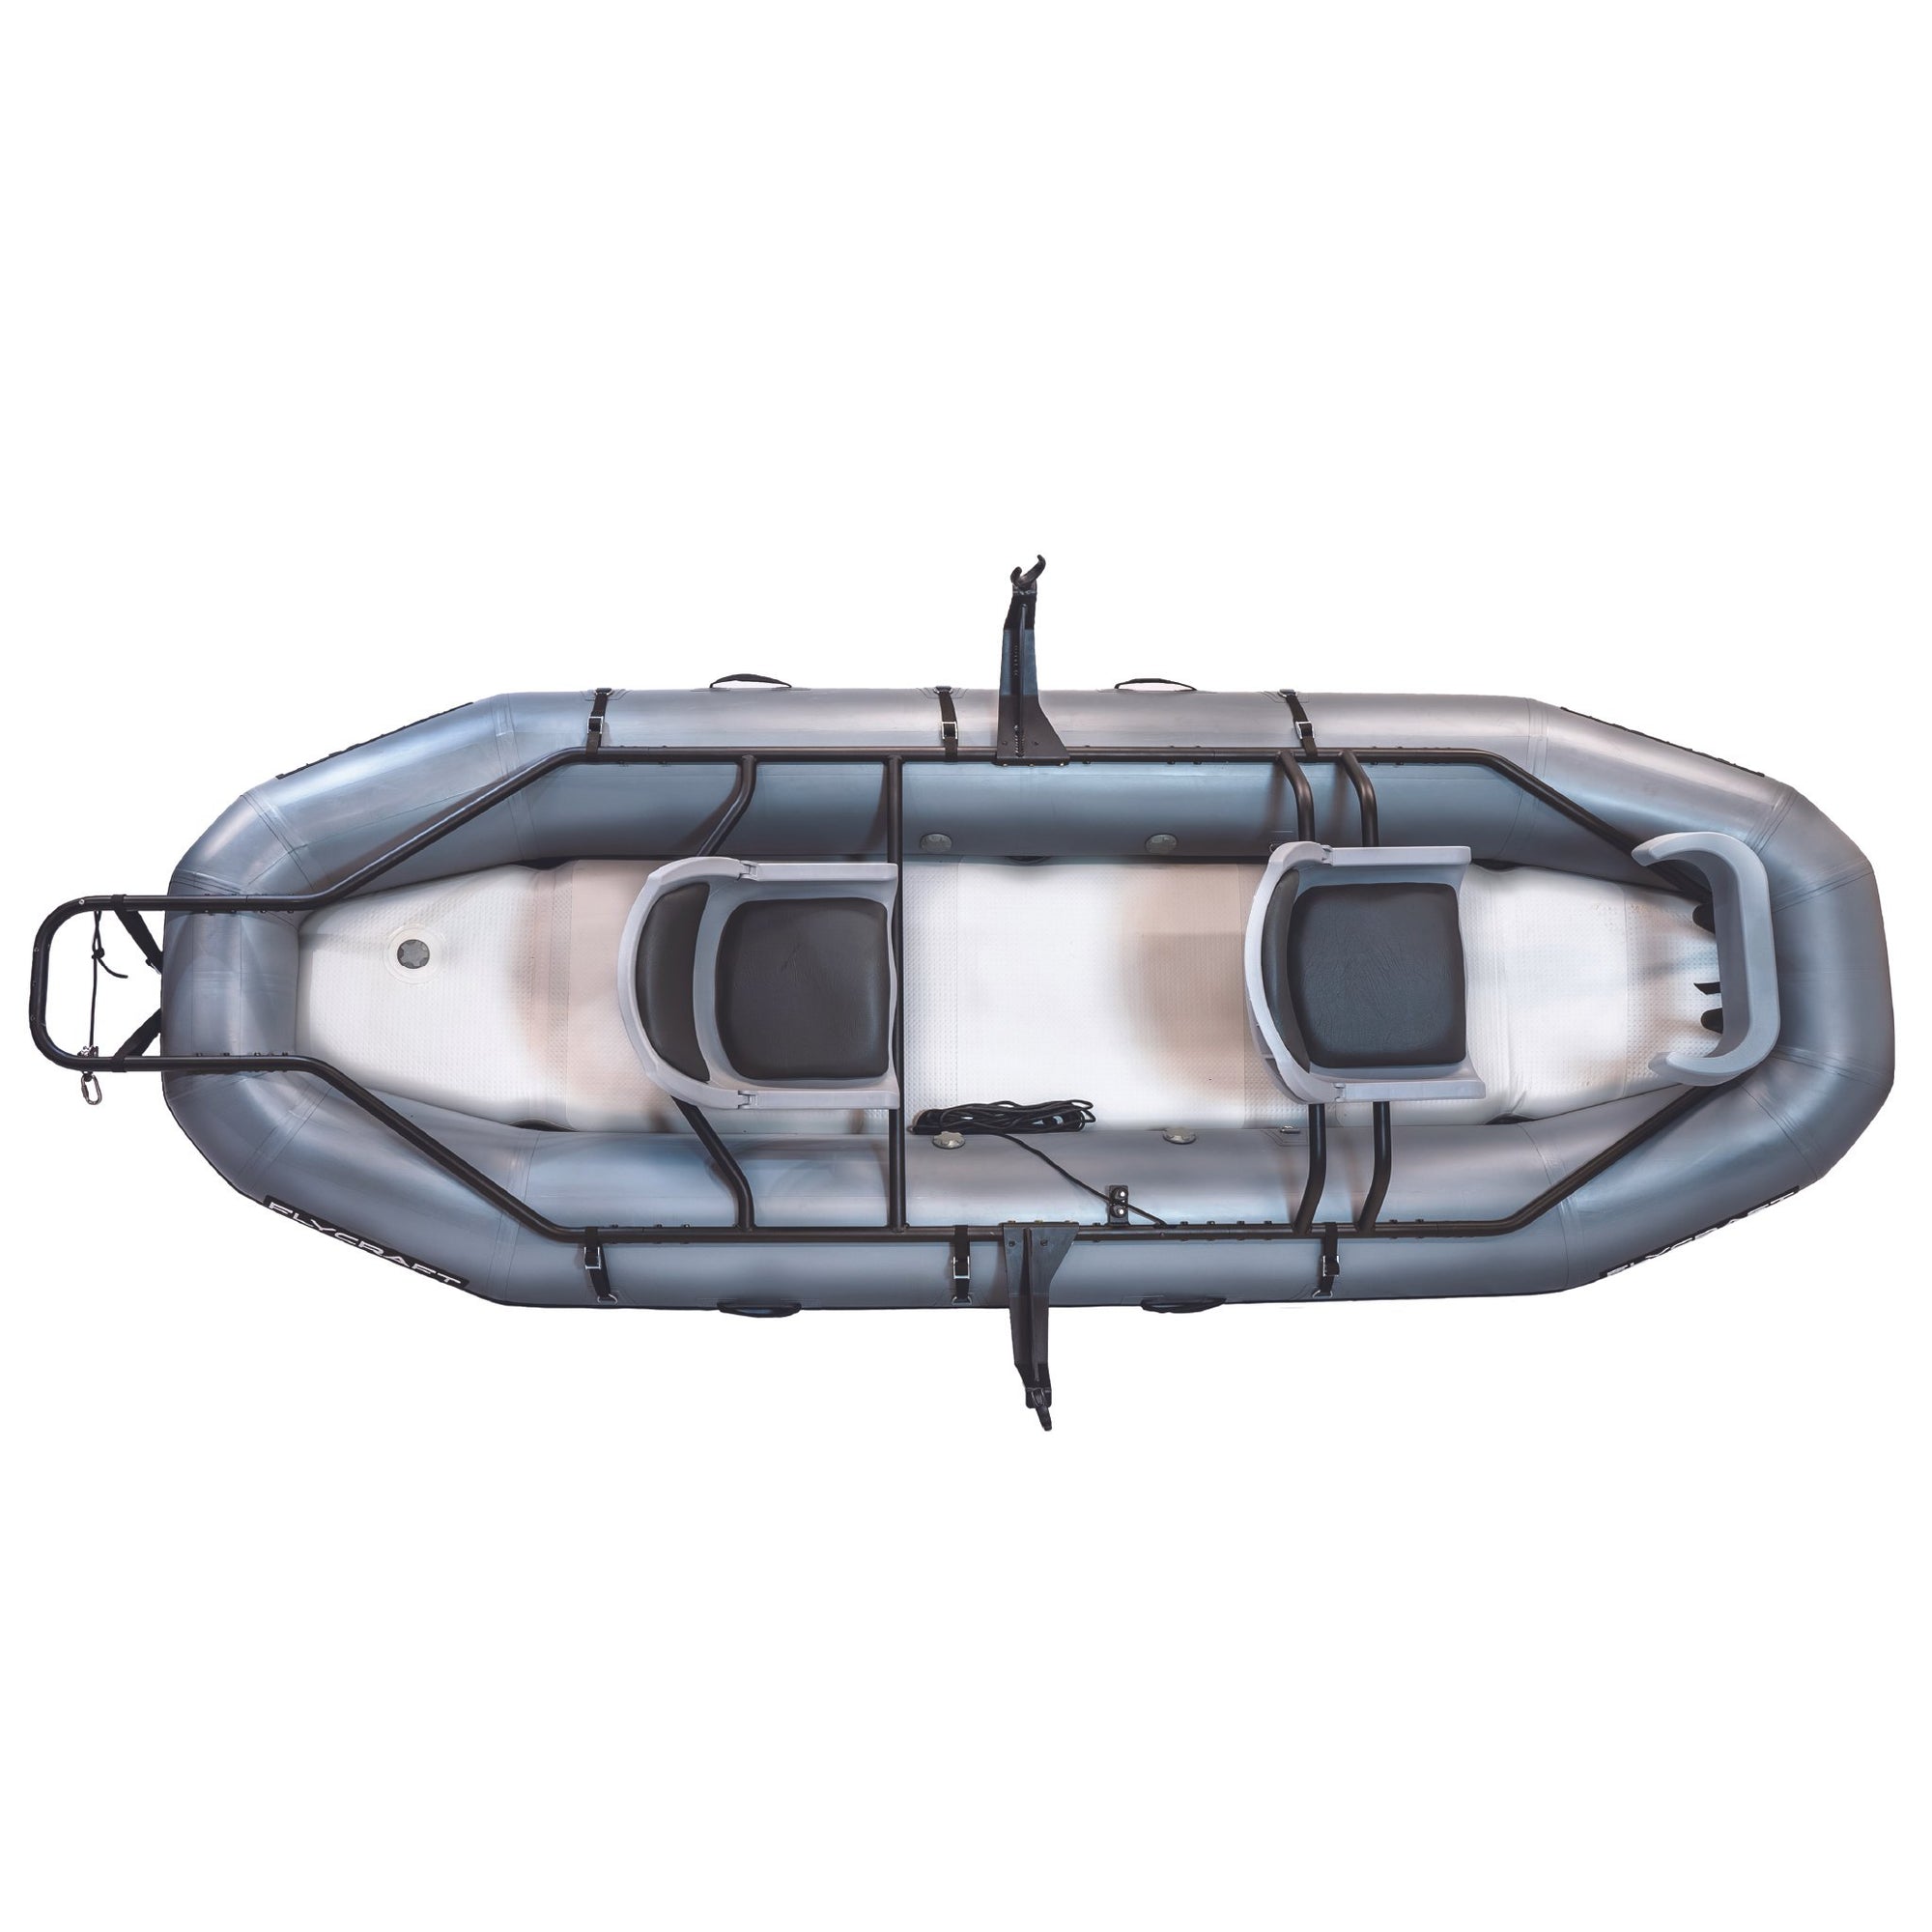 2-Person Inflatable Pontoon Boat Review